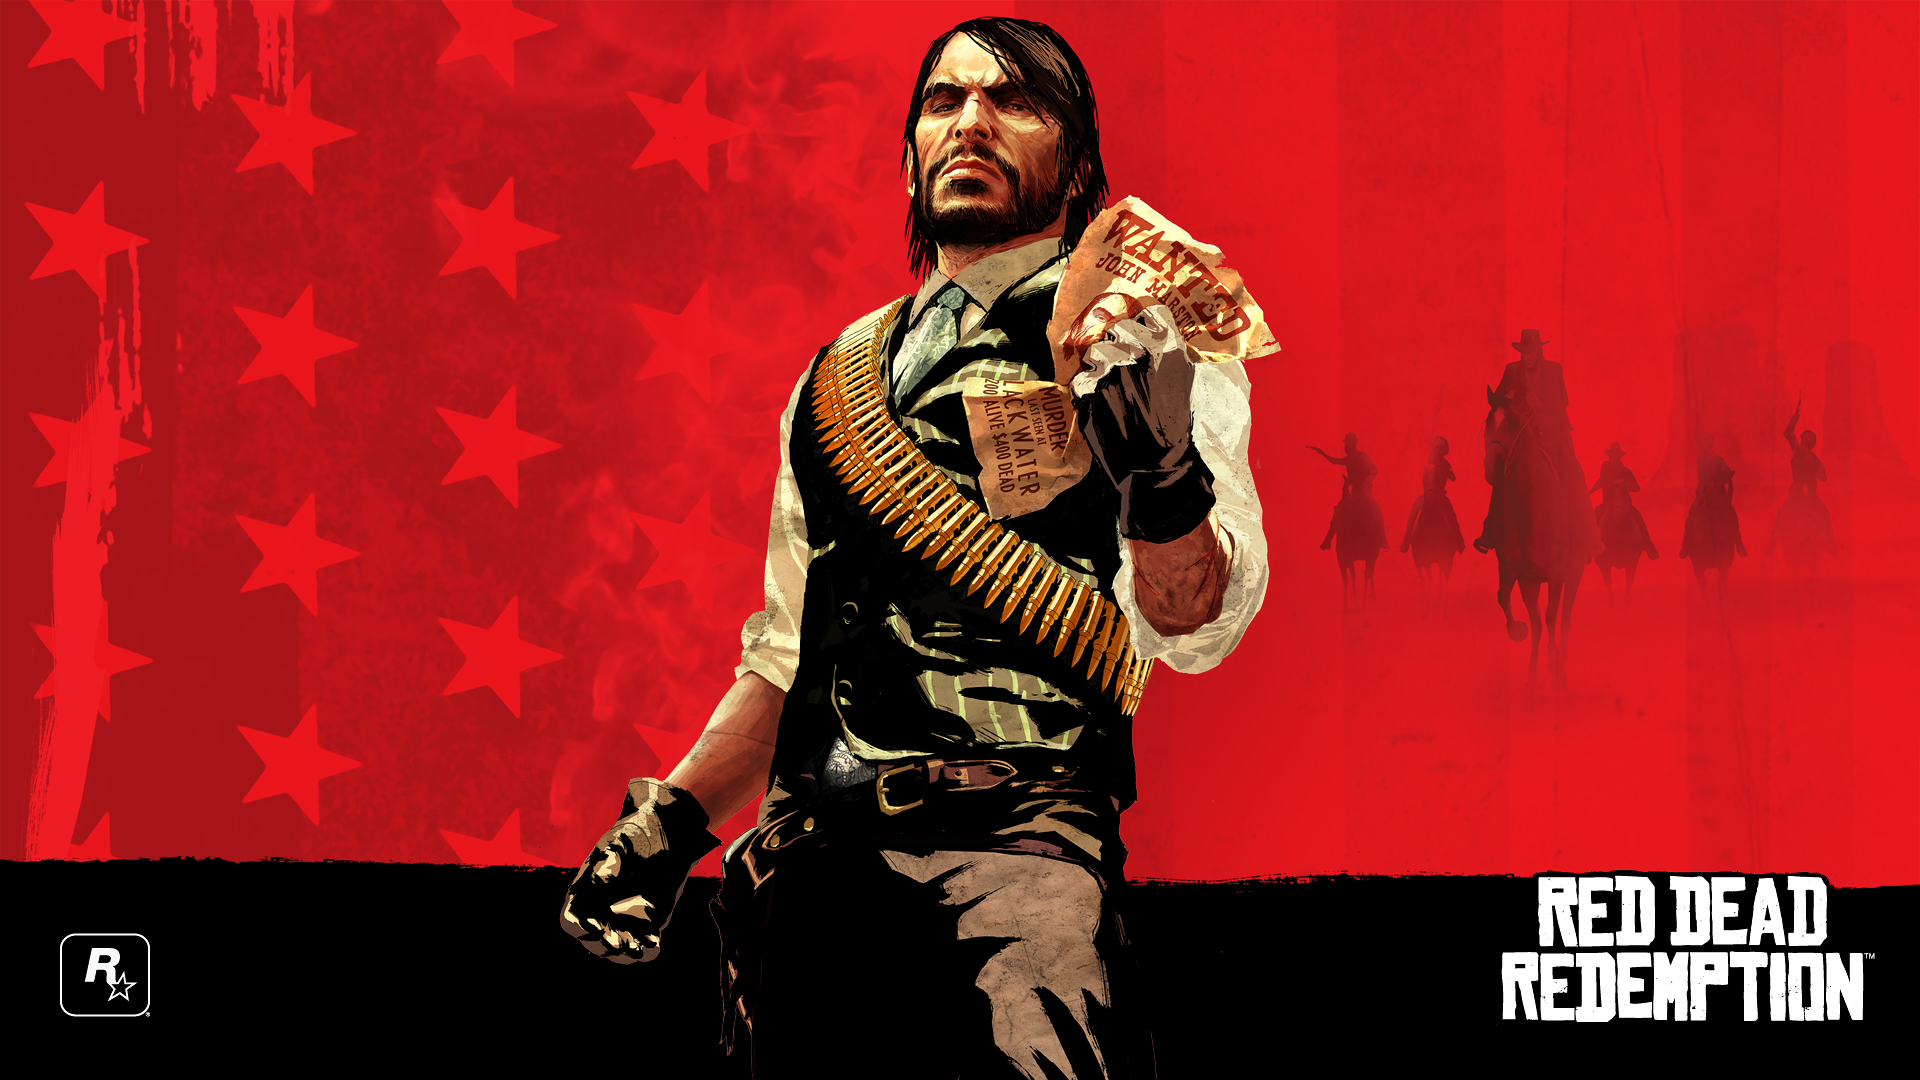 HD Red Dead Redemption Wallpaper Full Pictures